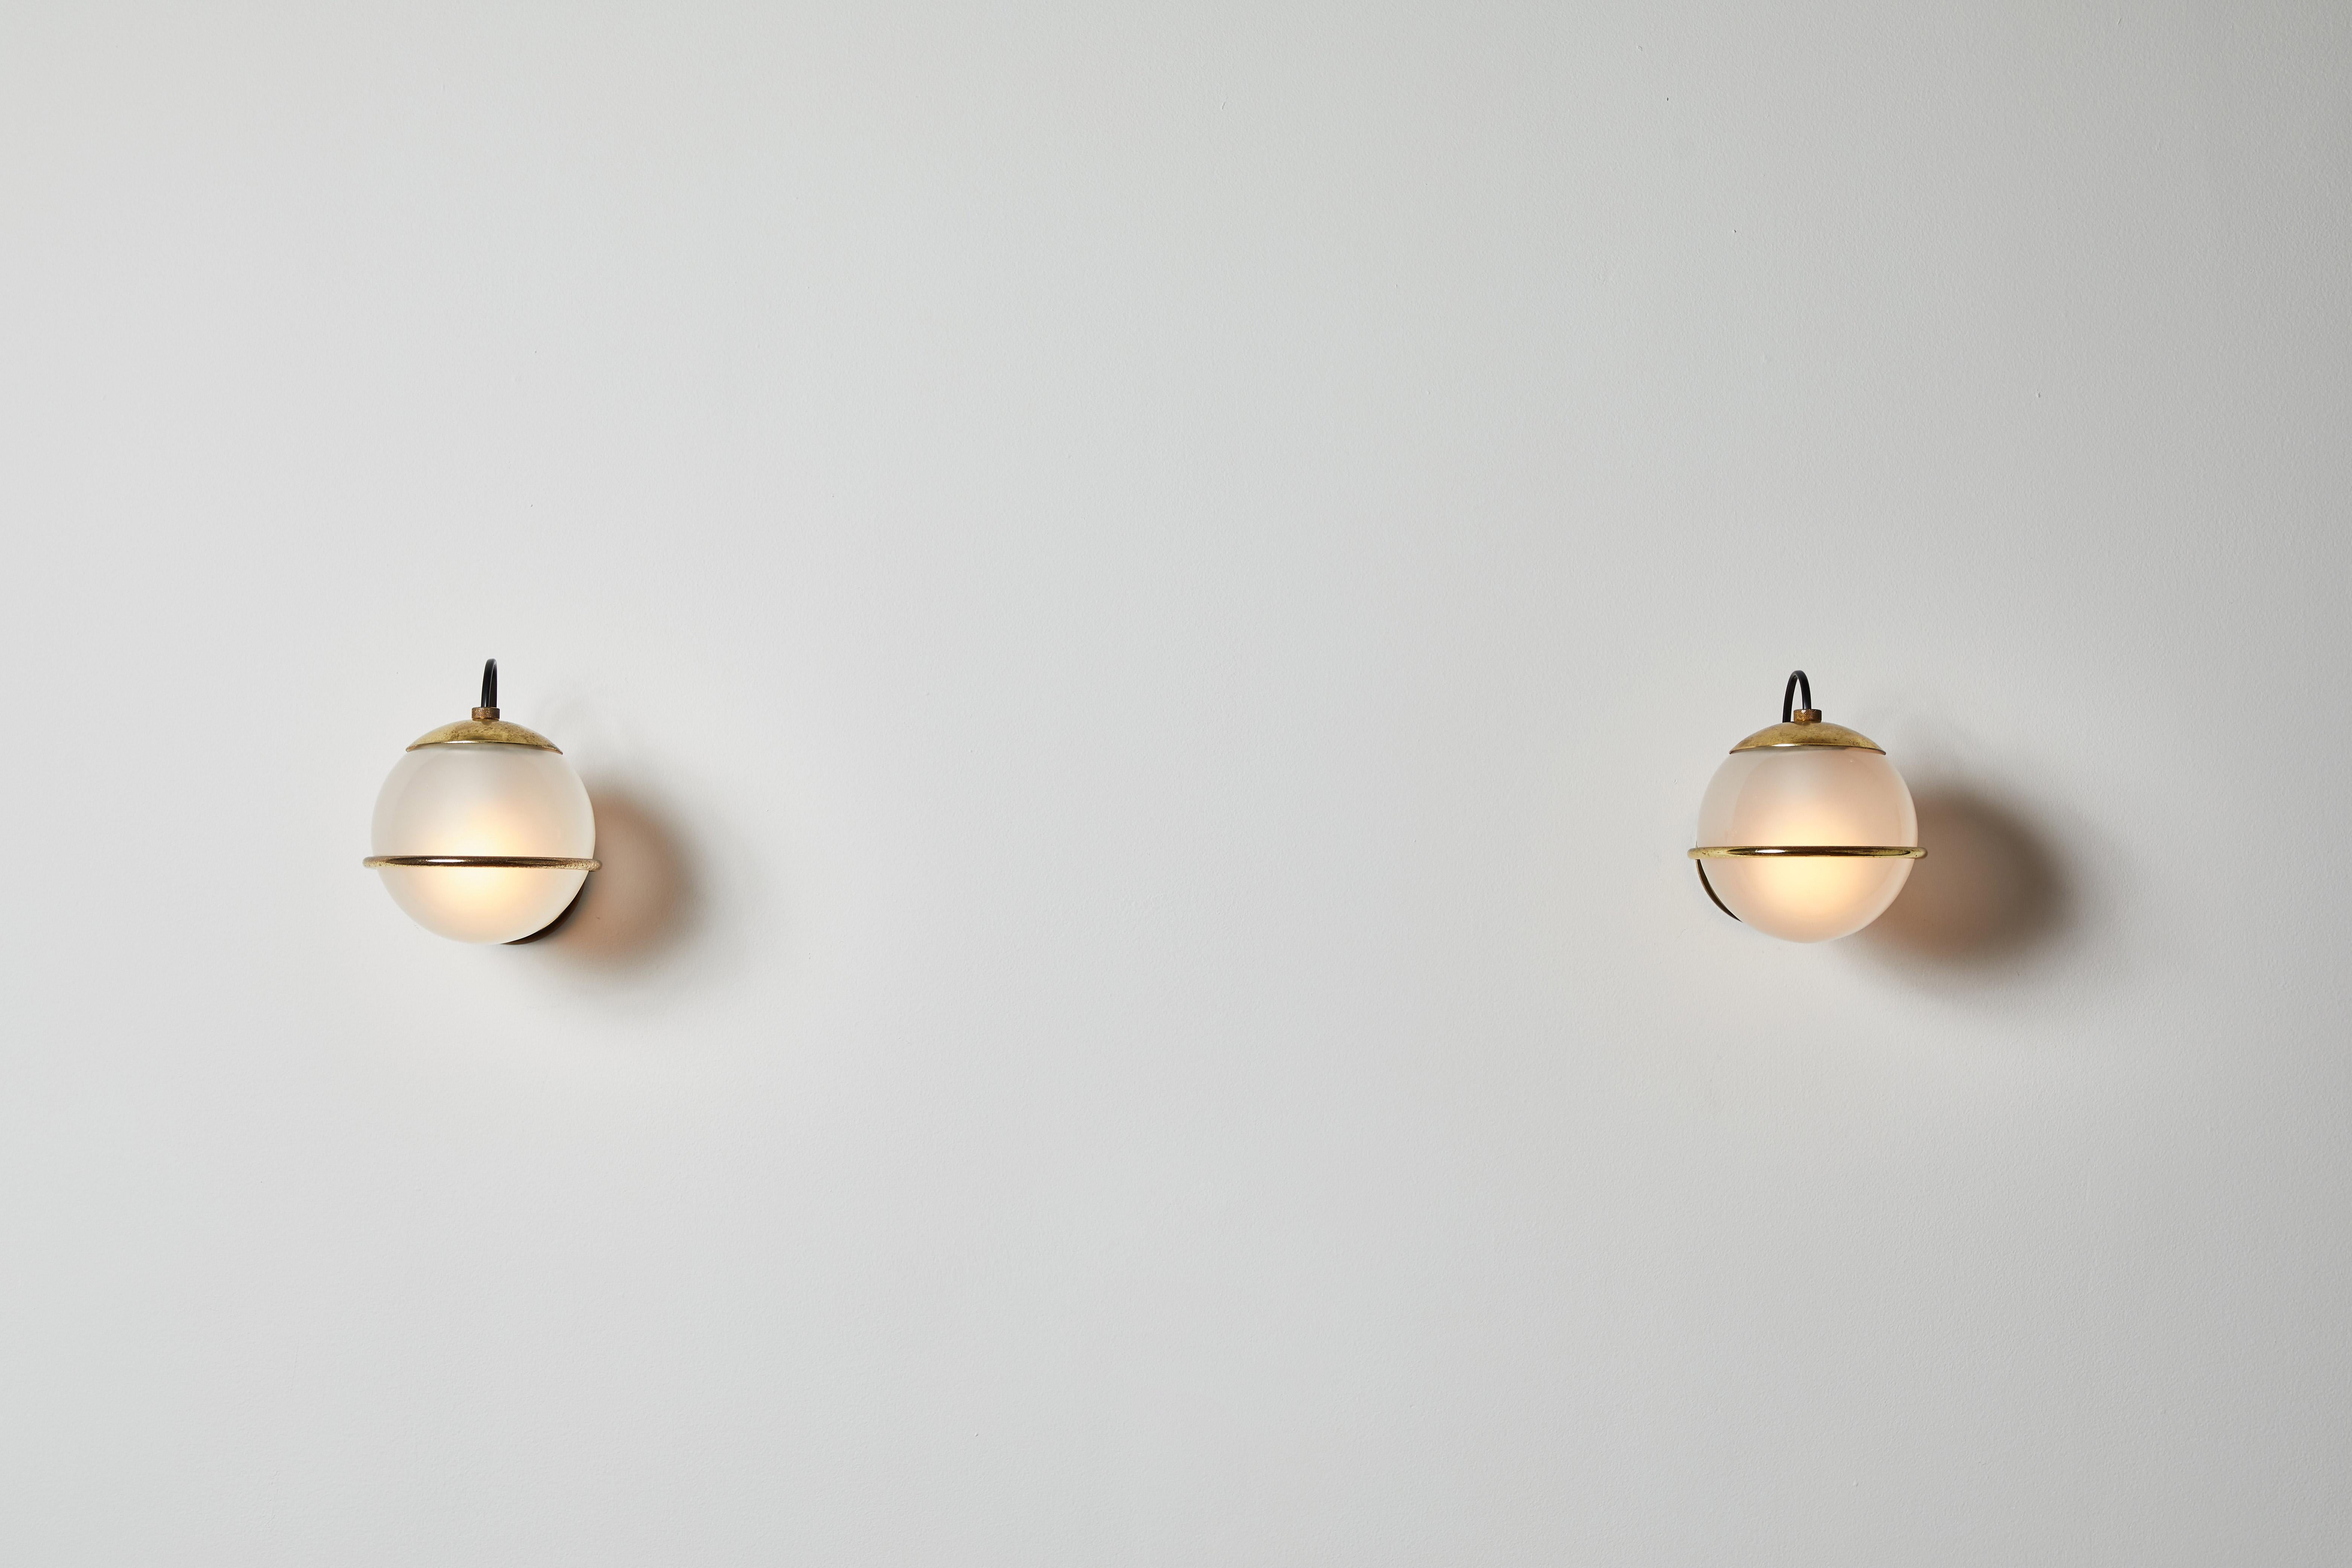  Pair of Model 237/1 sconces by Gino Sarfatti for Arteluce. Designed and manufactured in Italy, 1959. Brass armature, opaline glass diffuser. Rewired for U.S. junction boxes. Each light takes one 60w European candelabra bulb. Bulbs provided as a